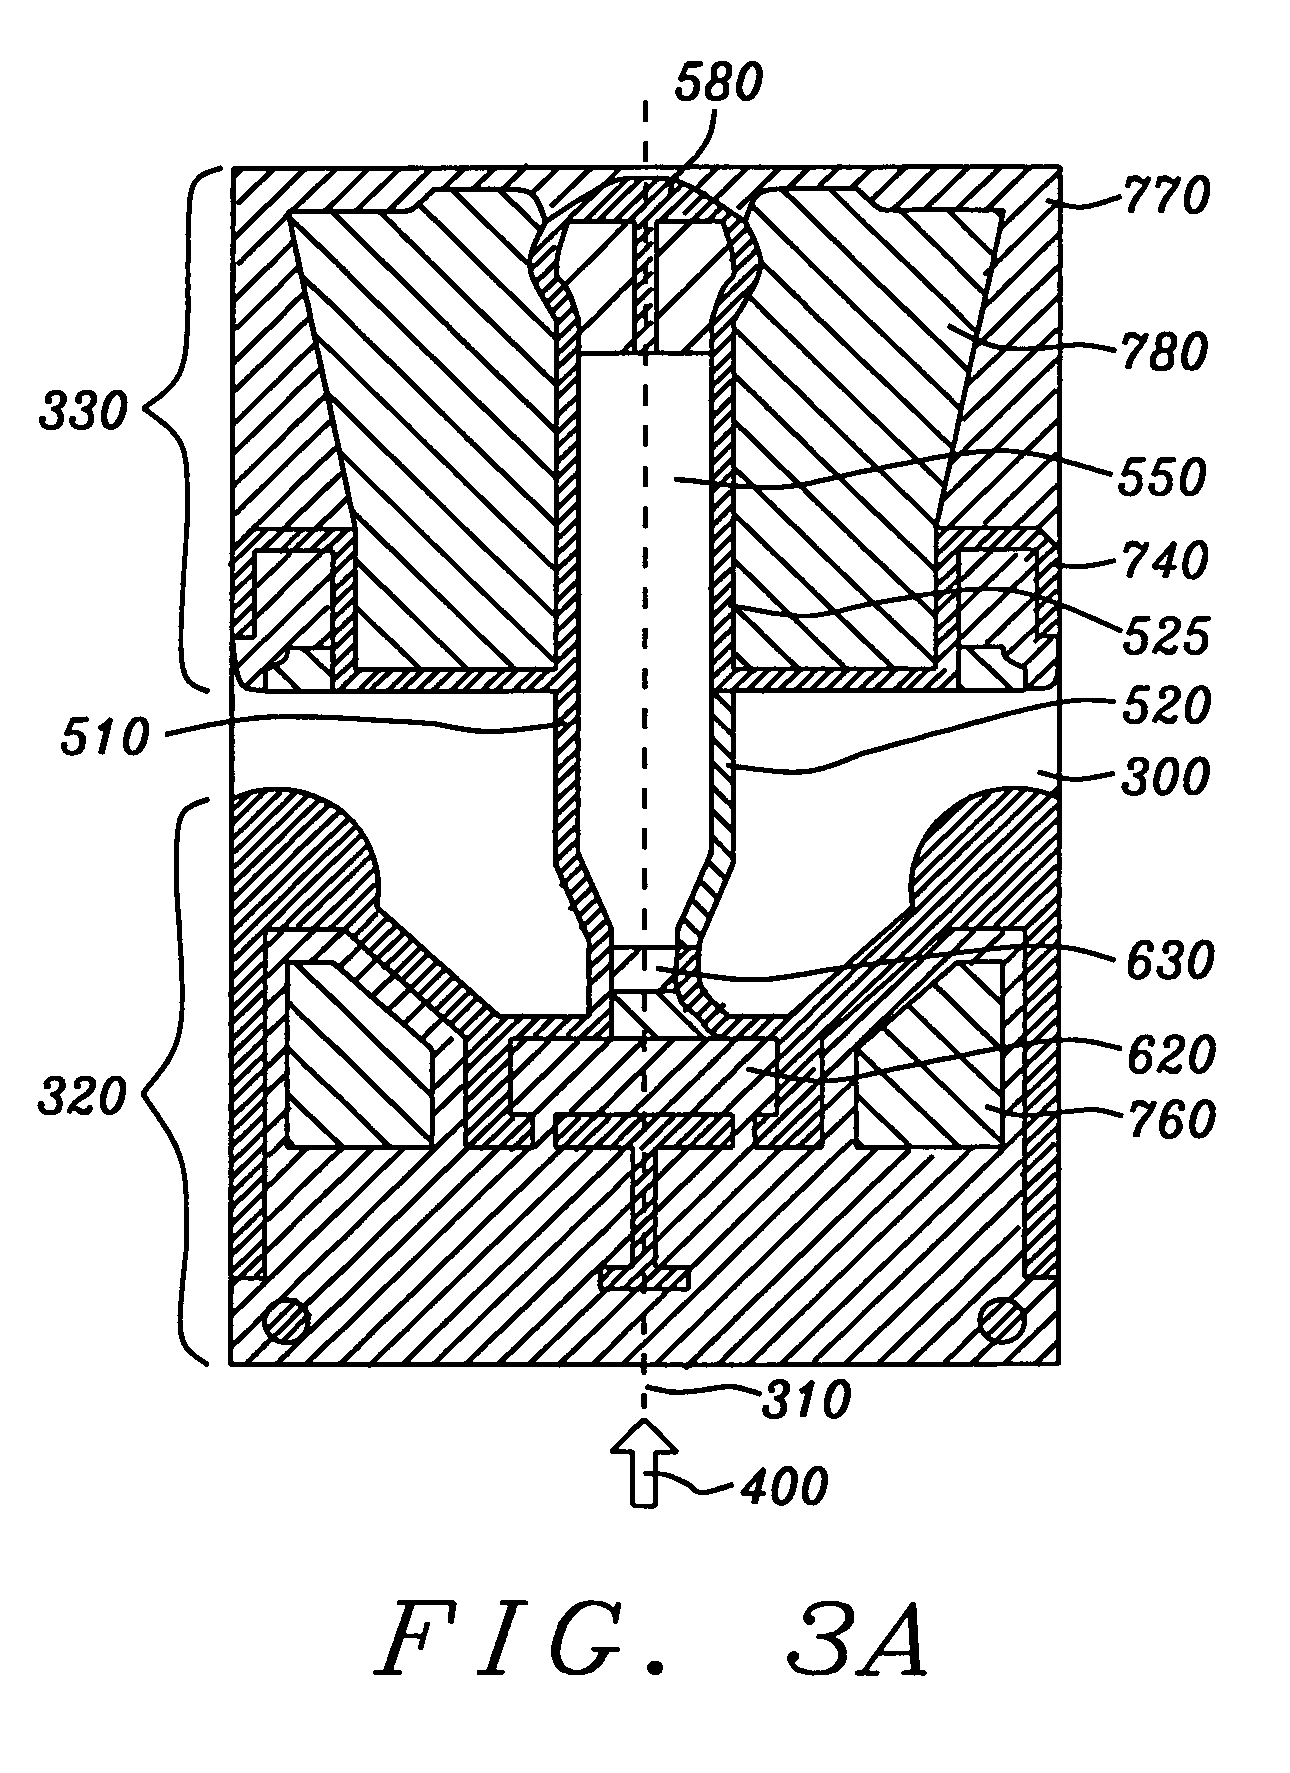 Air-bearing slider design for sub-nanometer clearance in hard disk drive (HDD)